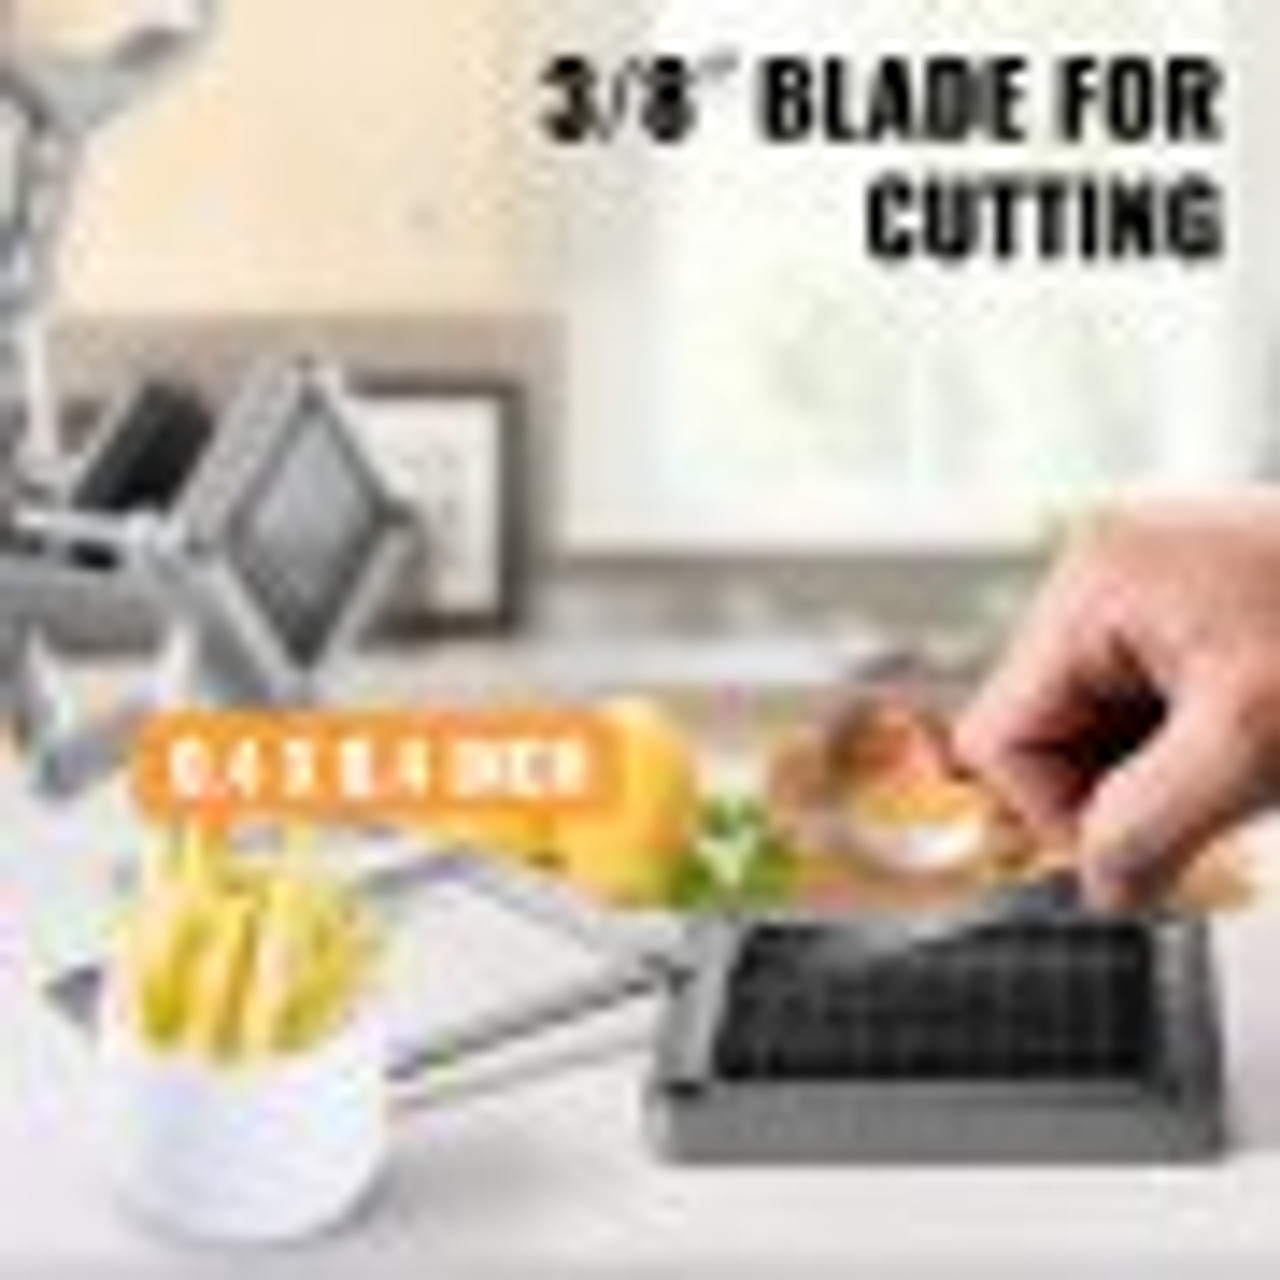 Commercial French Fry Cutter 3/8 Inch Blade Potato Fry Cutter Wall-mounted or Tabletop Potato Cutter with Wall Bracket for Potatoes Carrots Cucumbers